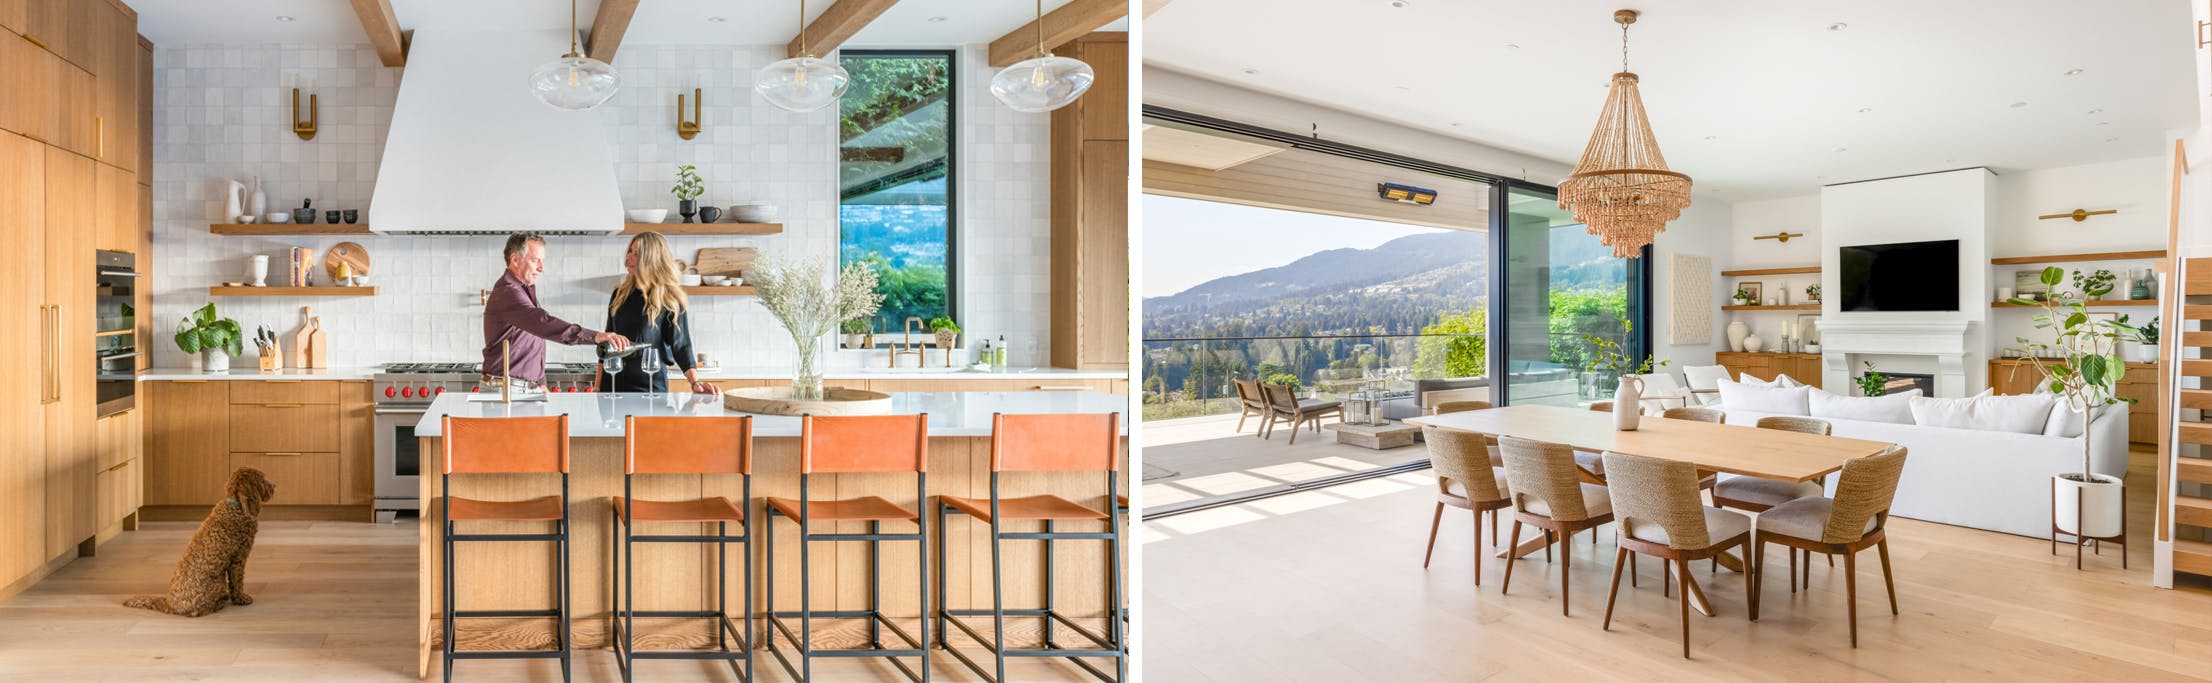 Californian living with opening glass wall systems